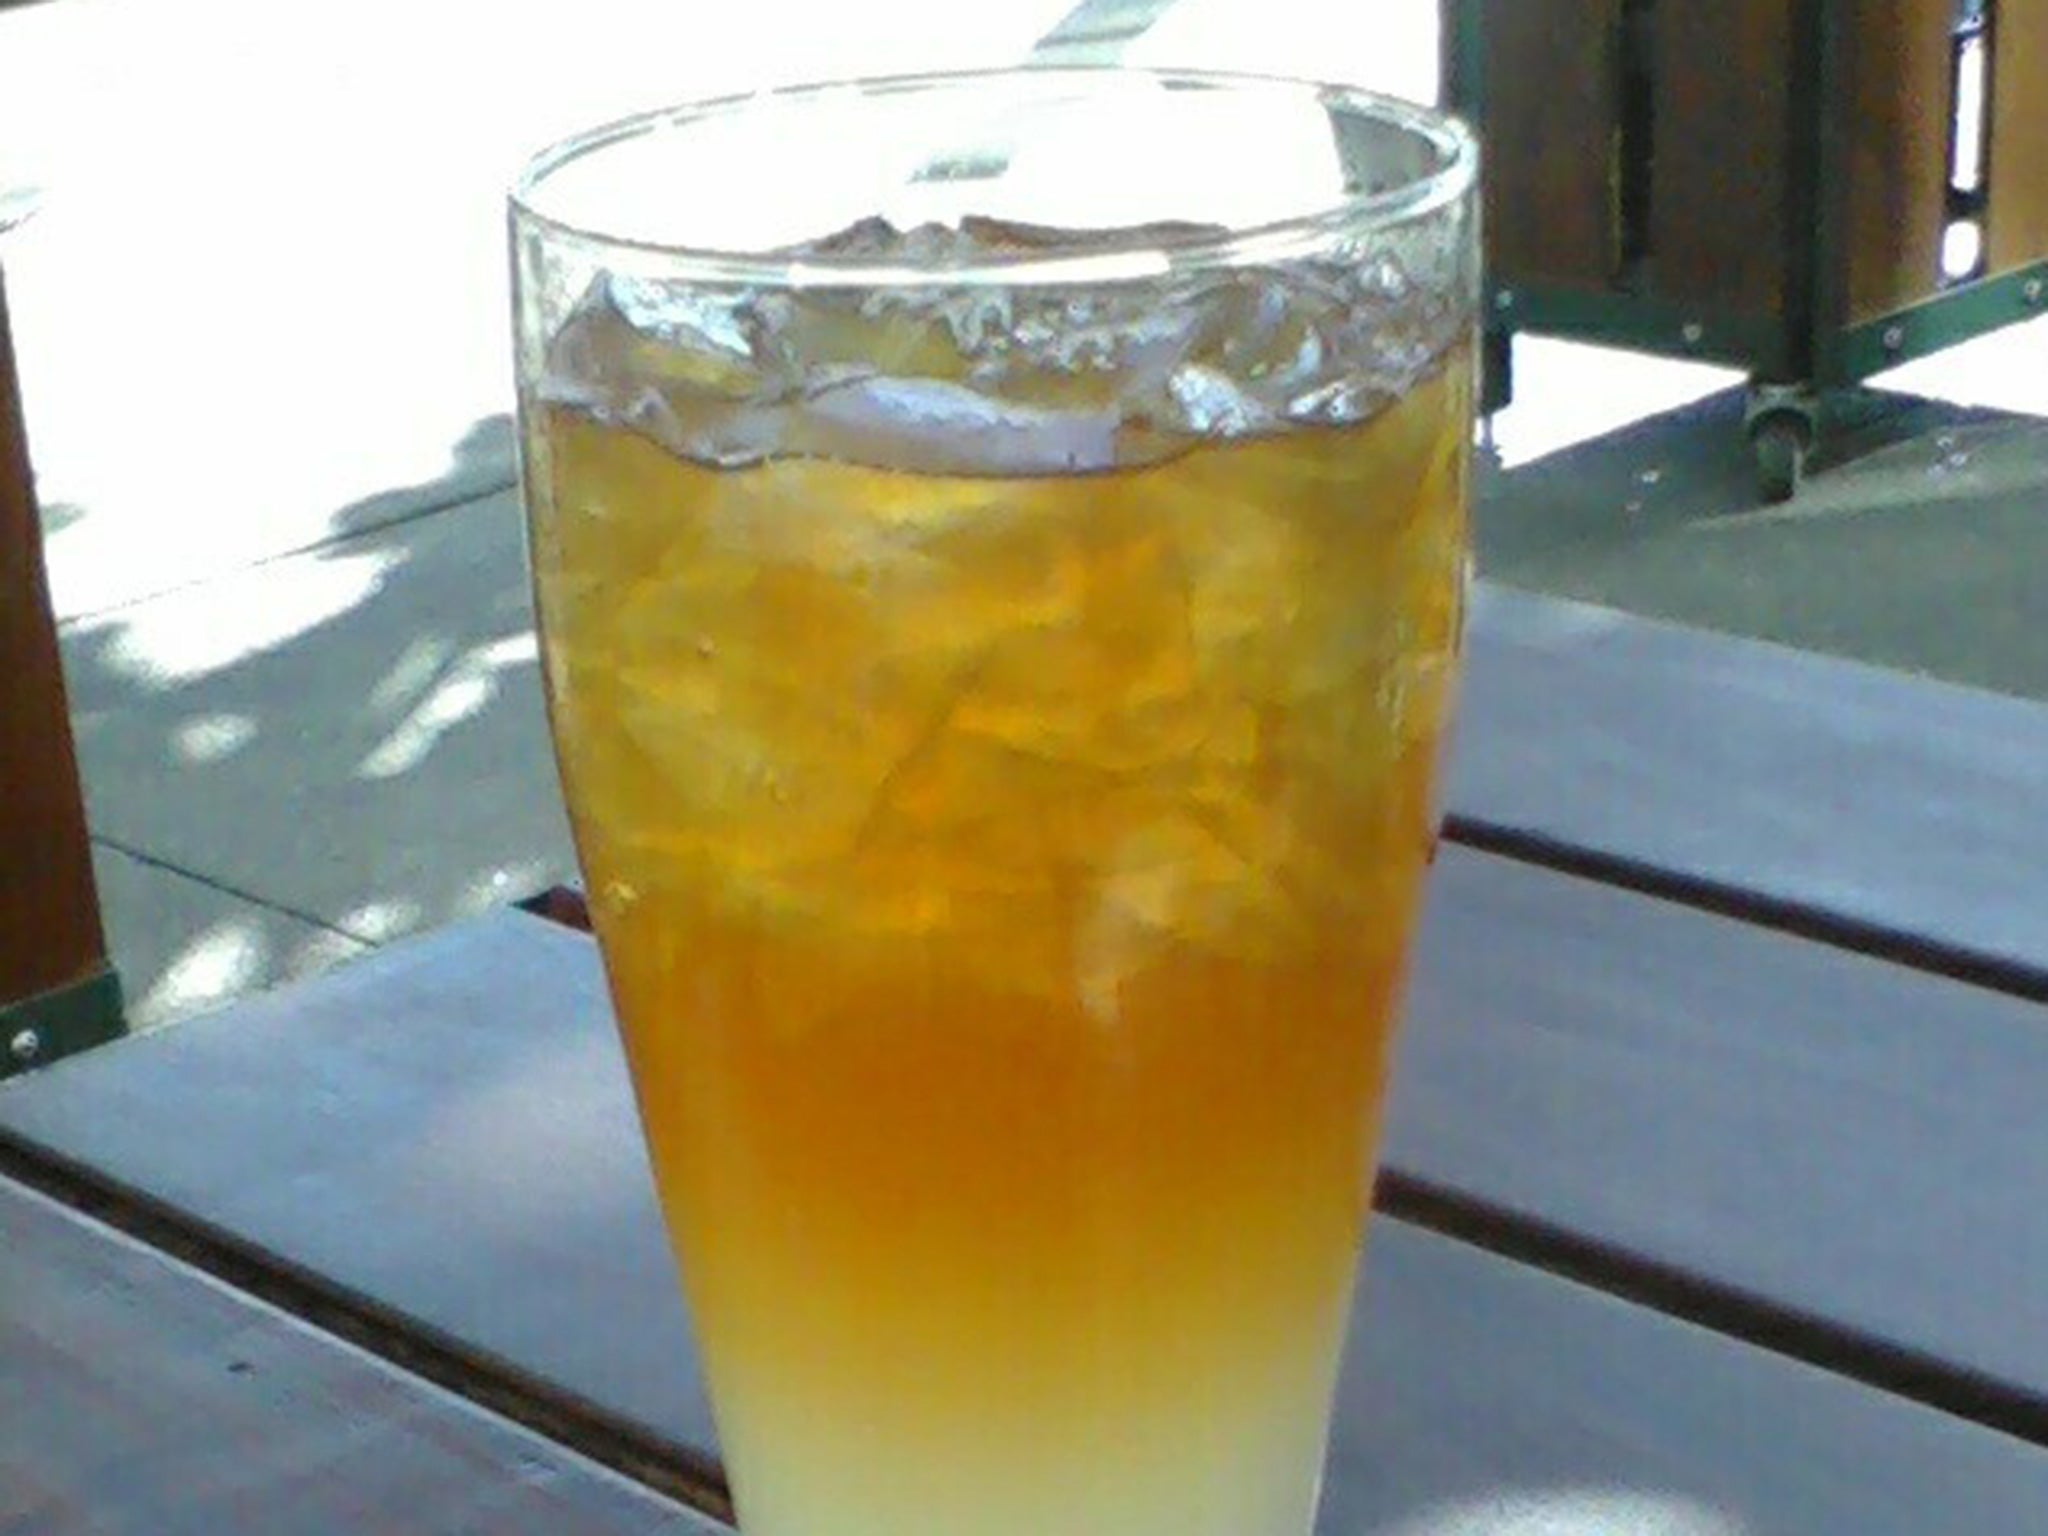 The 'Arnold Palmer', a blend of ice tea and lemonade